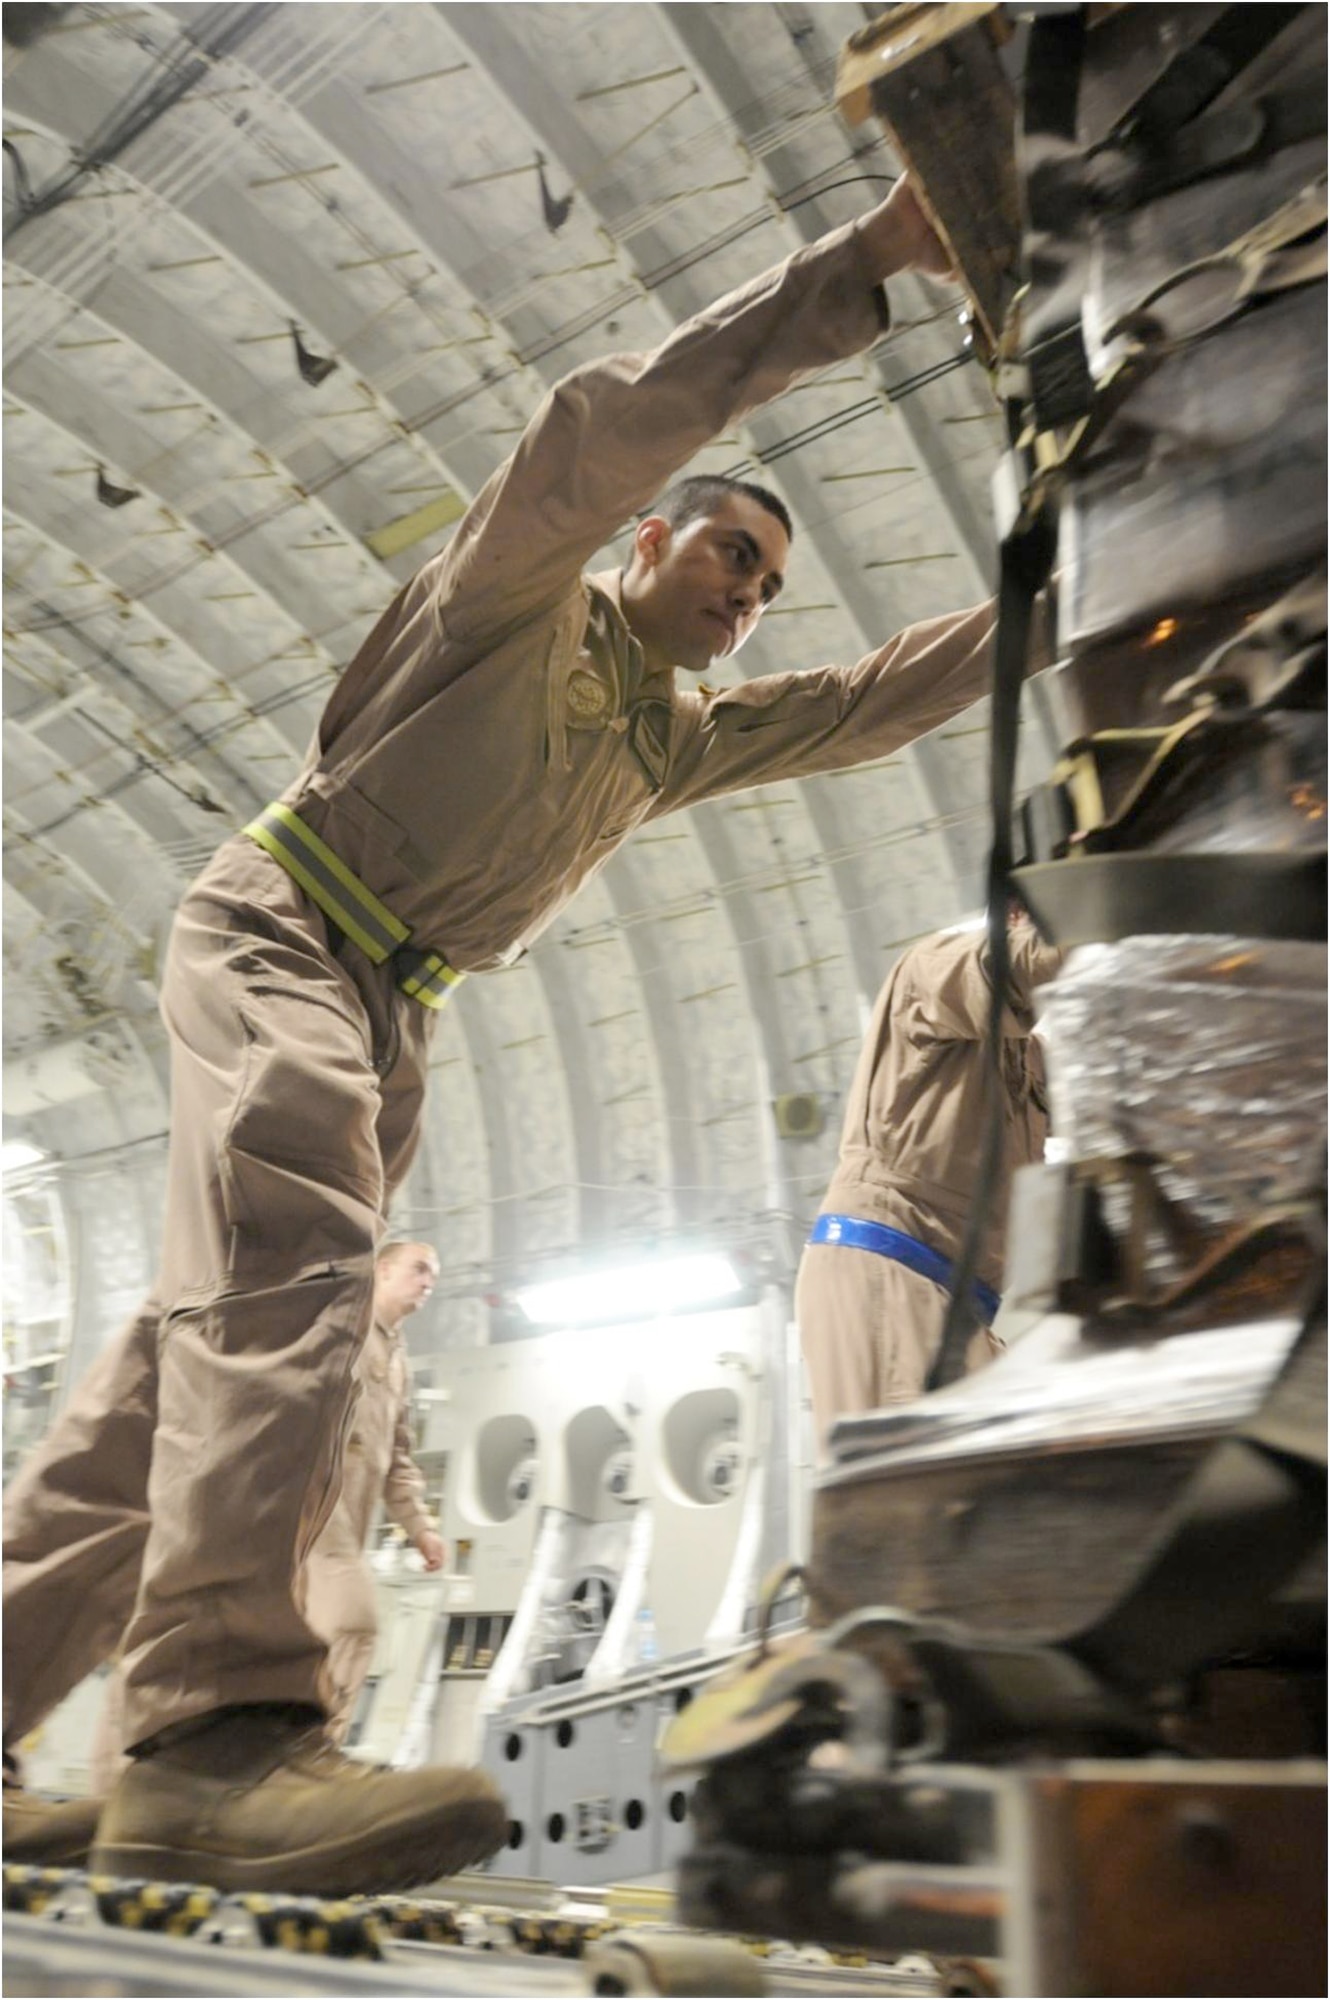 Staff Sgt. Manuel Chacon pushes a pallet of halal meals off a C-17 Globemaster III that carried them Aug. 2, 2010, to northwestern Pakistan. These meals are some of the 345 thousand that have been delivered since July 31, 2010, as part of the humanitarian flood relief assistance provided to the area that's been hit by monsoon rains in recent days. Sergeant Chacon is a loadmaster assigned to the 817th Expeditionary Airlift Squadron at the Transit Center at Manas, Kyrgyzstan. (U.S. Air Force photo/Capt. Chris Sukach)